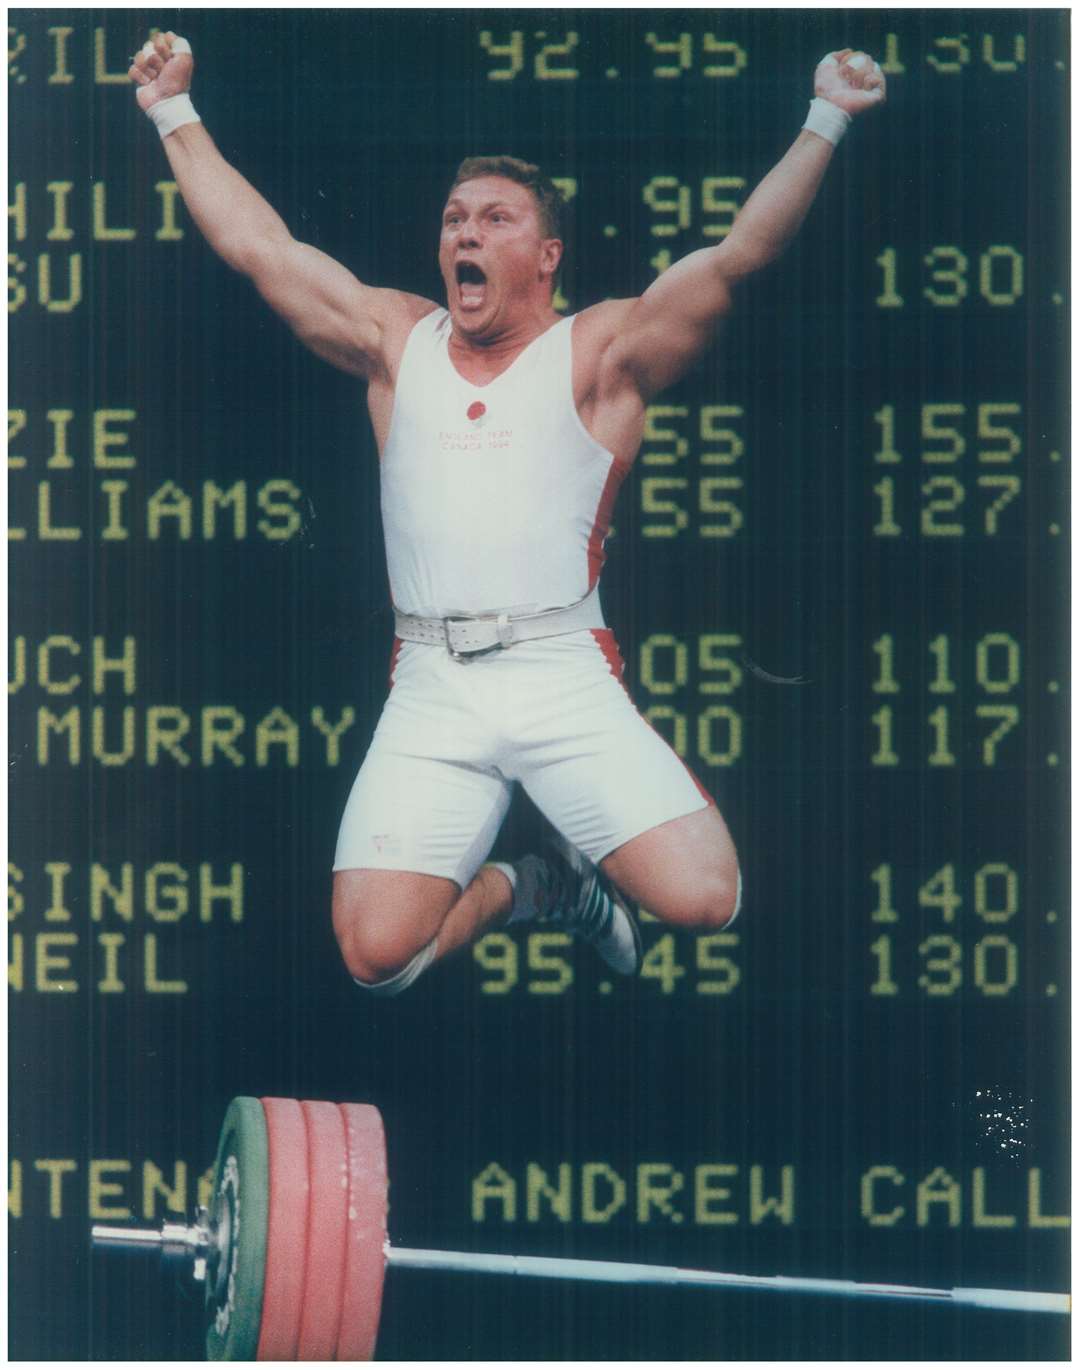 Andrew Callard celebrating a winning lift at the Canadian Commonwealth Games in 1994